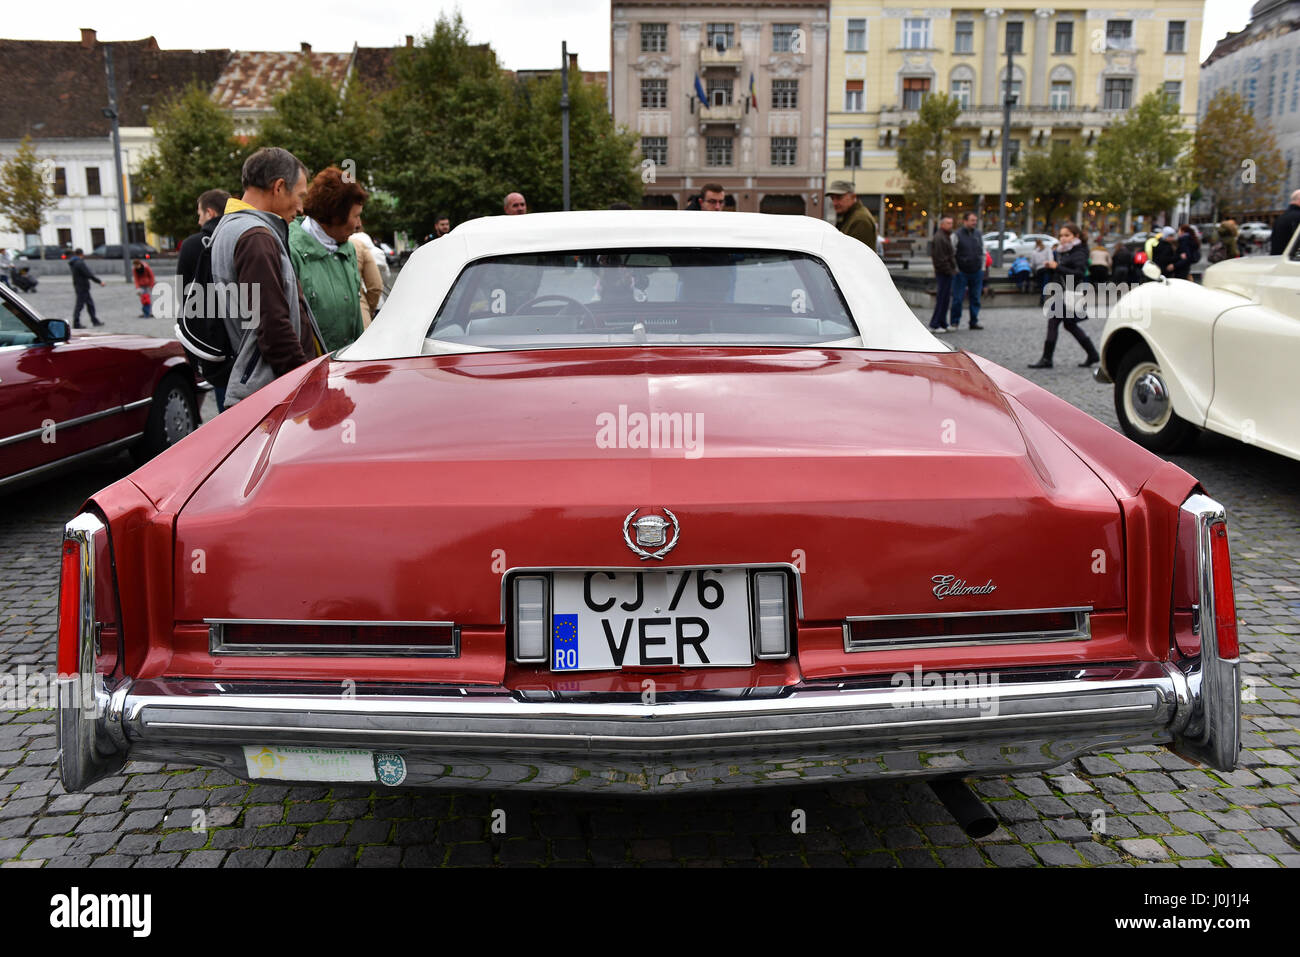 CLUJ-NAPOCA, ROMANIA - OCTOBER 15, 2016: Cadillac Eldorado and other vintage cars exhibited during the Retro Mobile Autumn Parade in the city of Cluj  Stock Photo